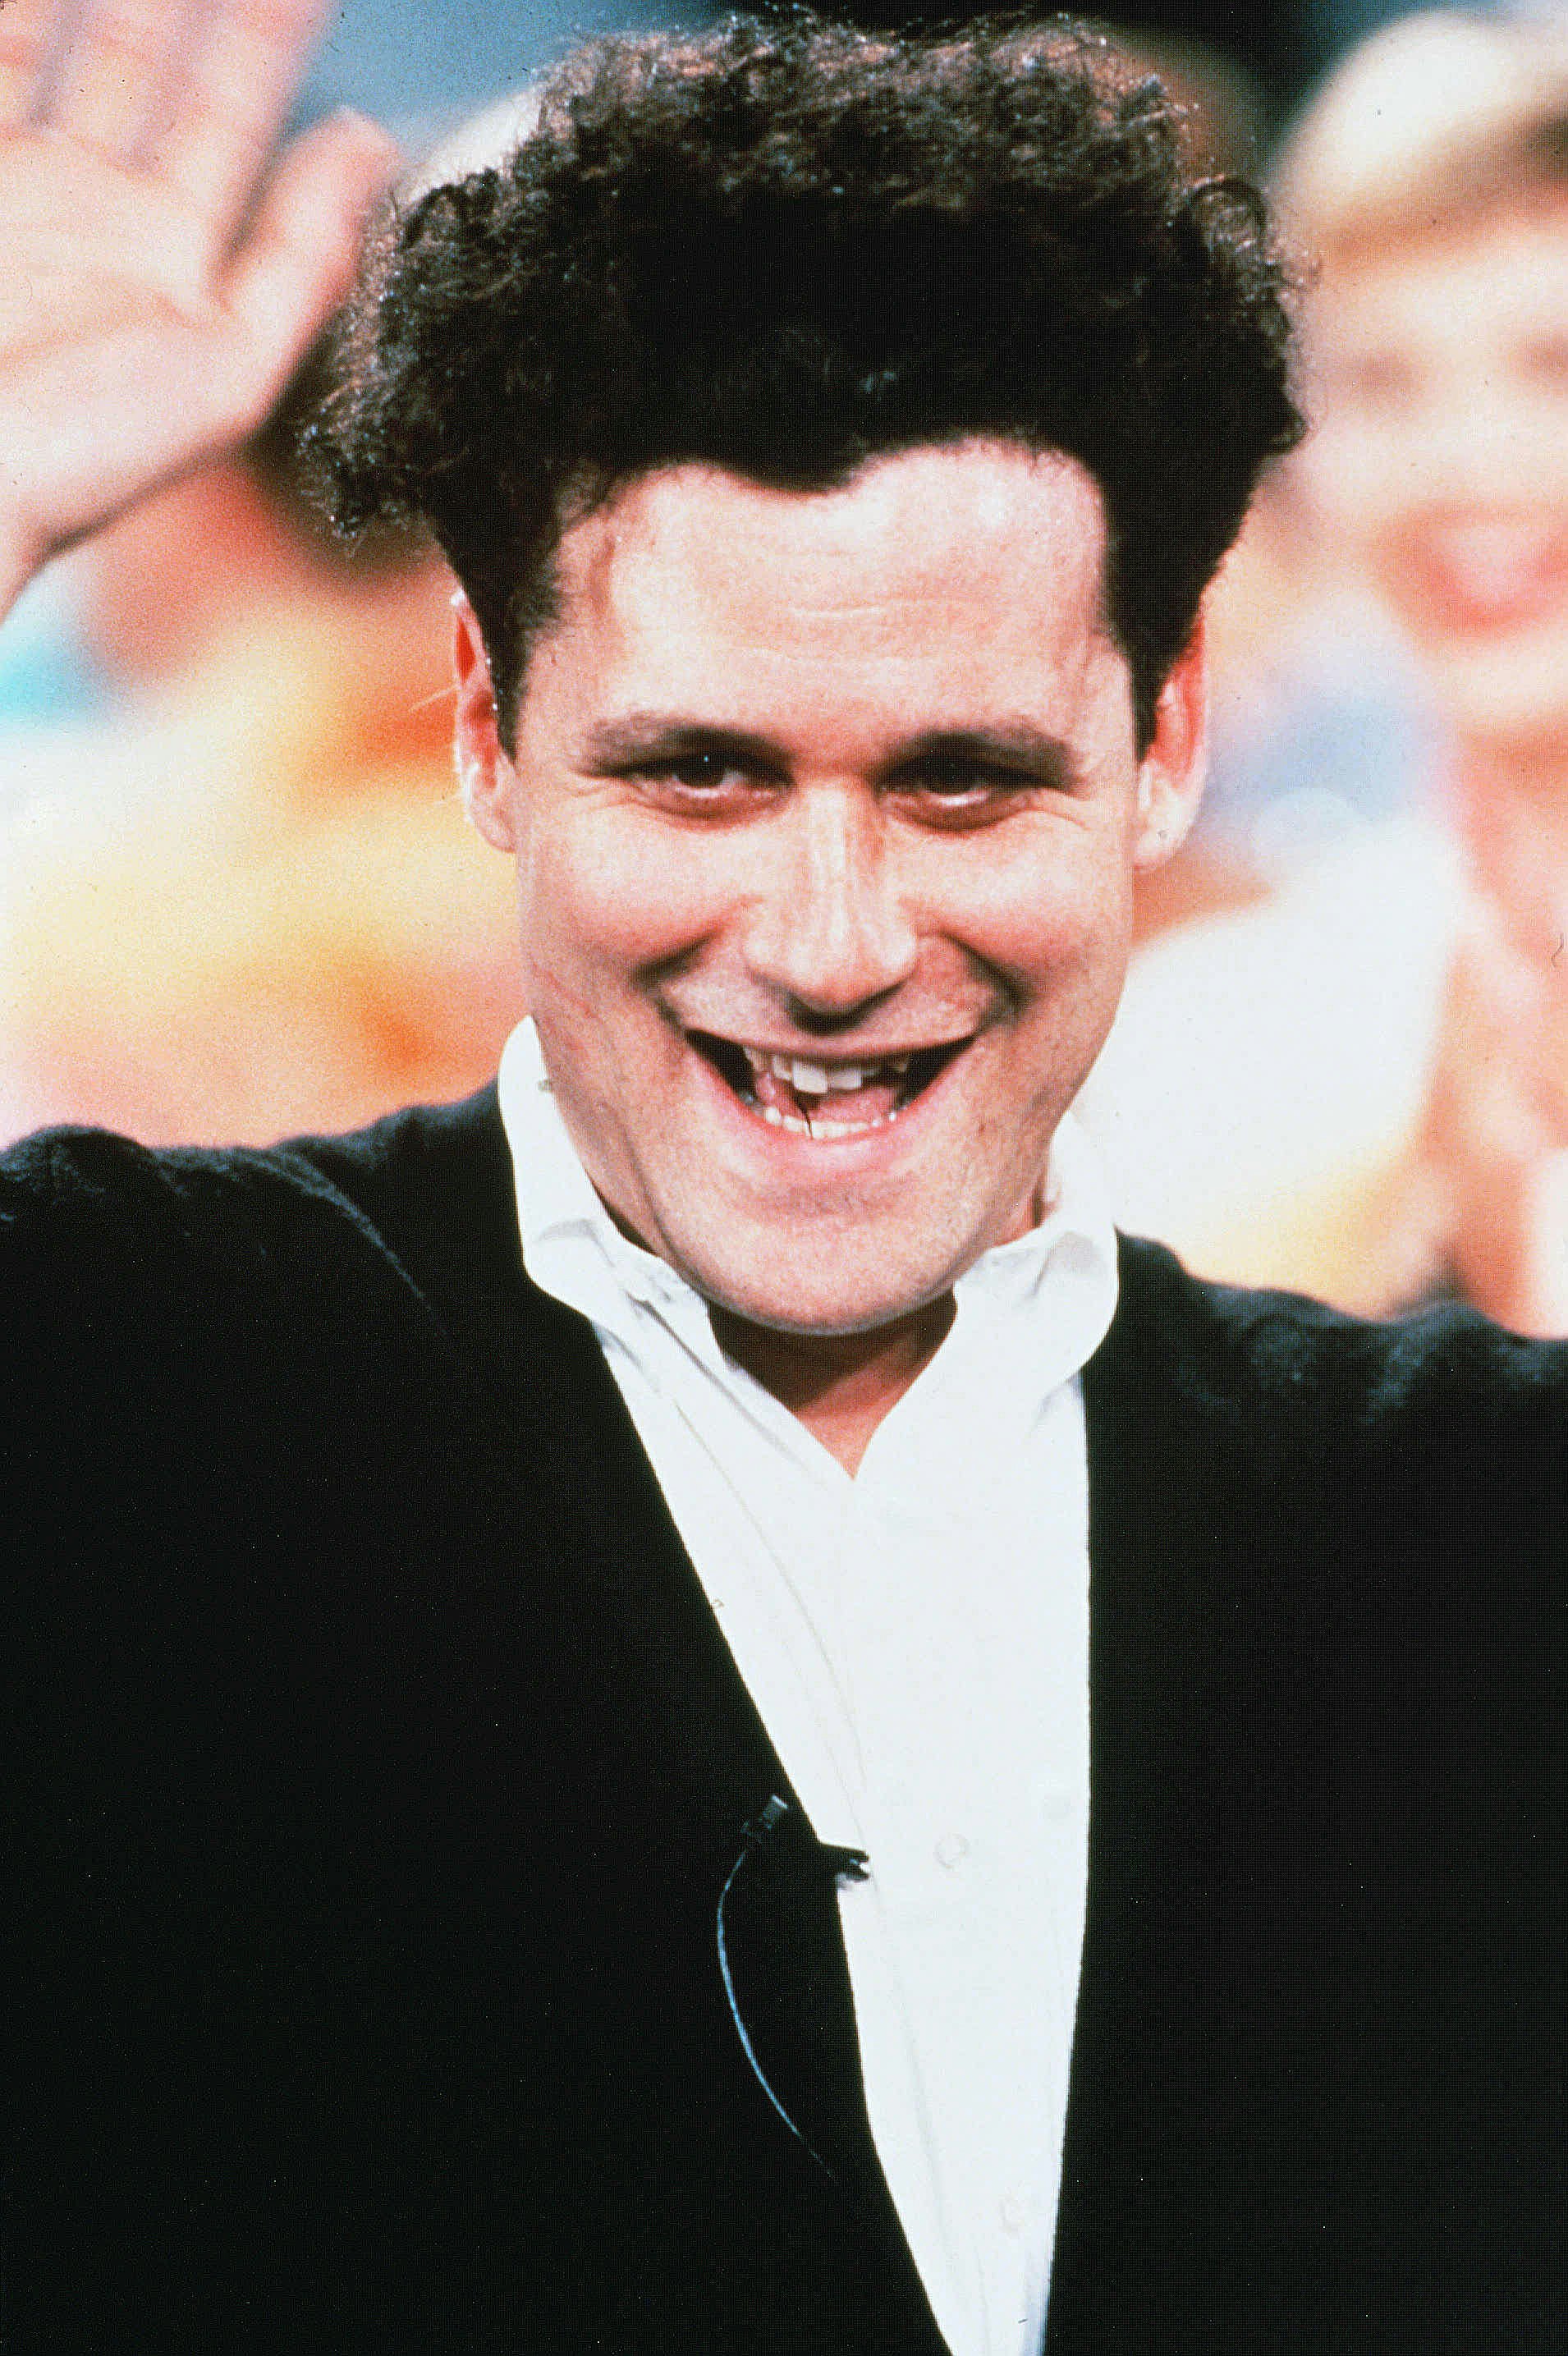 Unzipped' at 25: Isaac Mizrahi and Douglas Keeve Weigh In on Their Iconic  Fashion Documentary